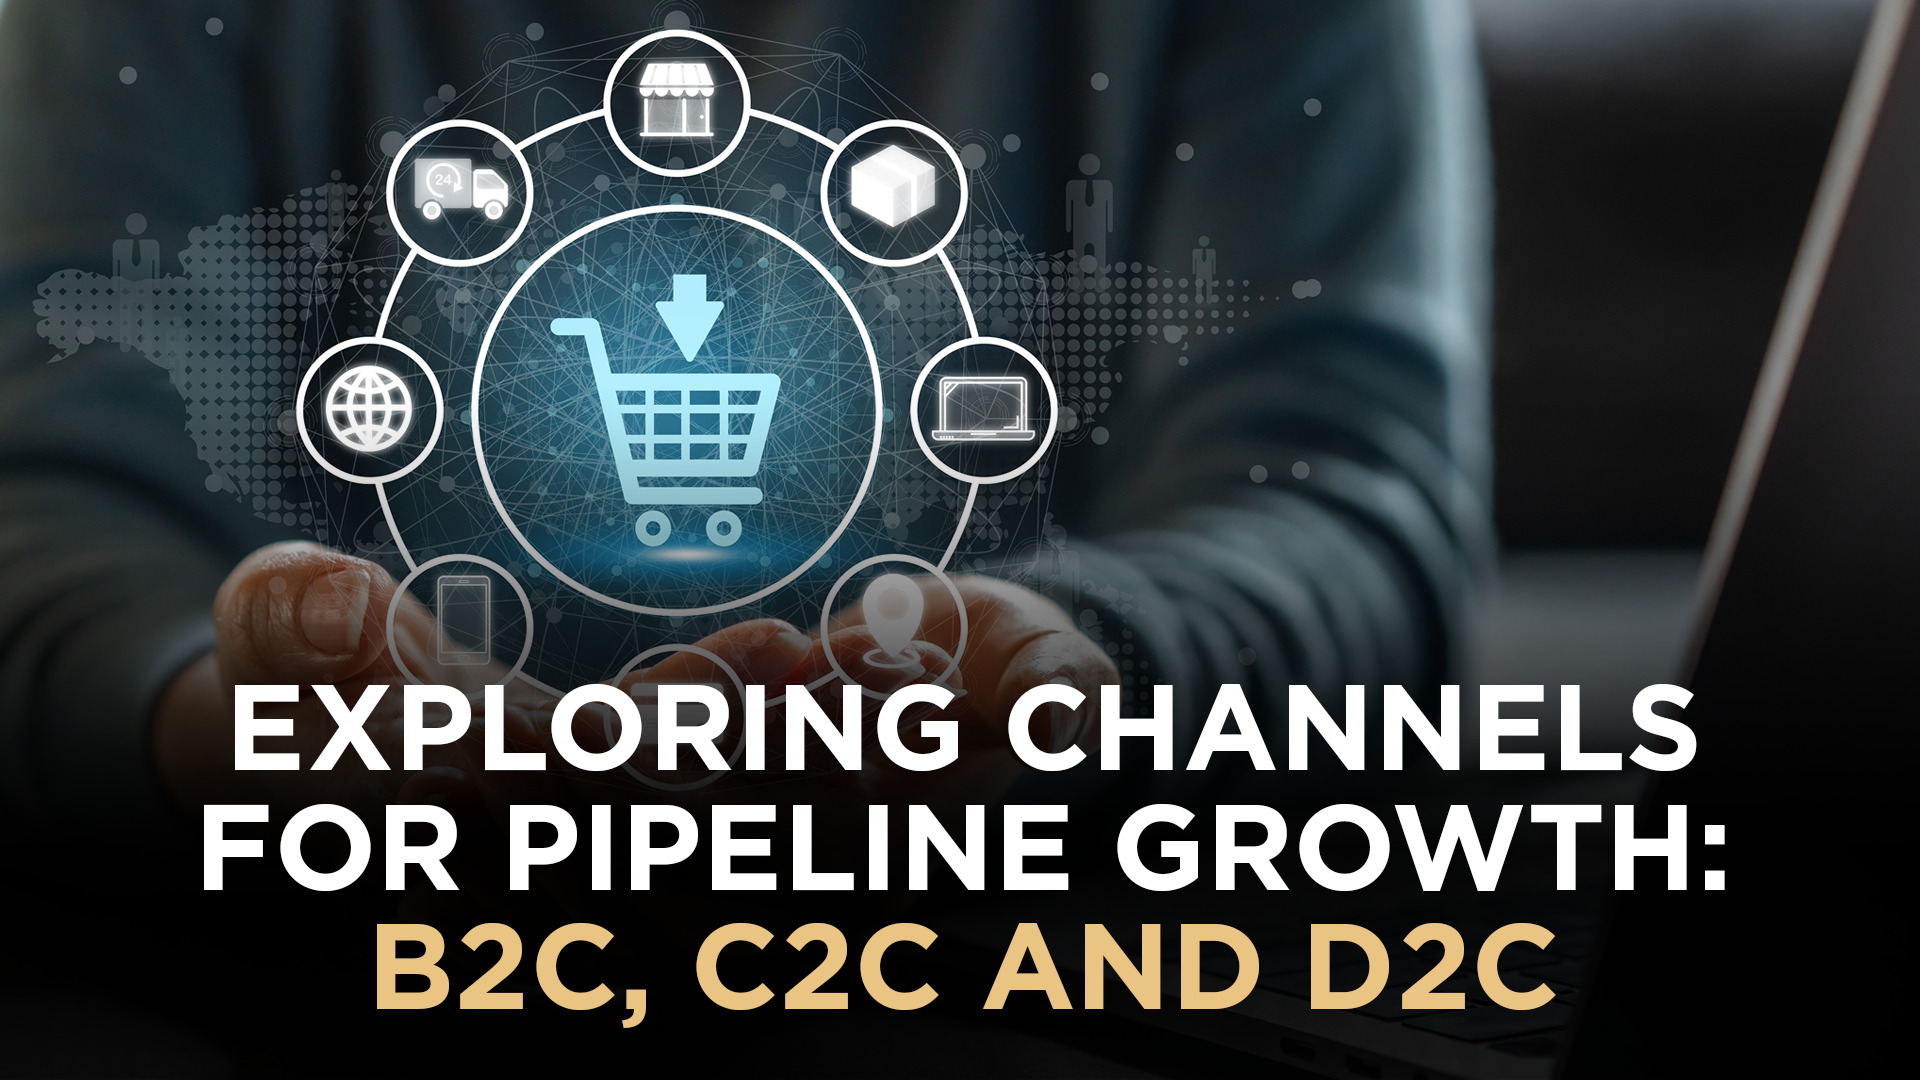 an image shows the blog title "Exploring Channels for Pipeline Growth in B2C, C2C, D2C"